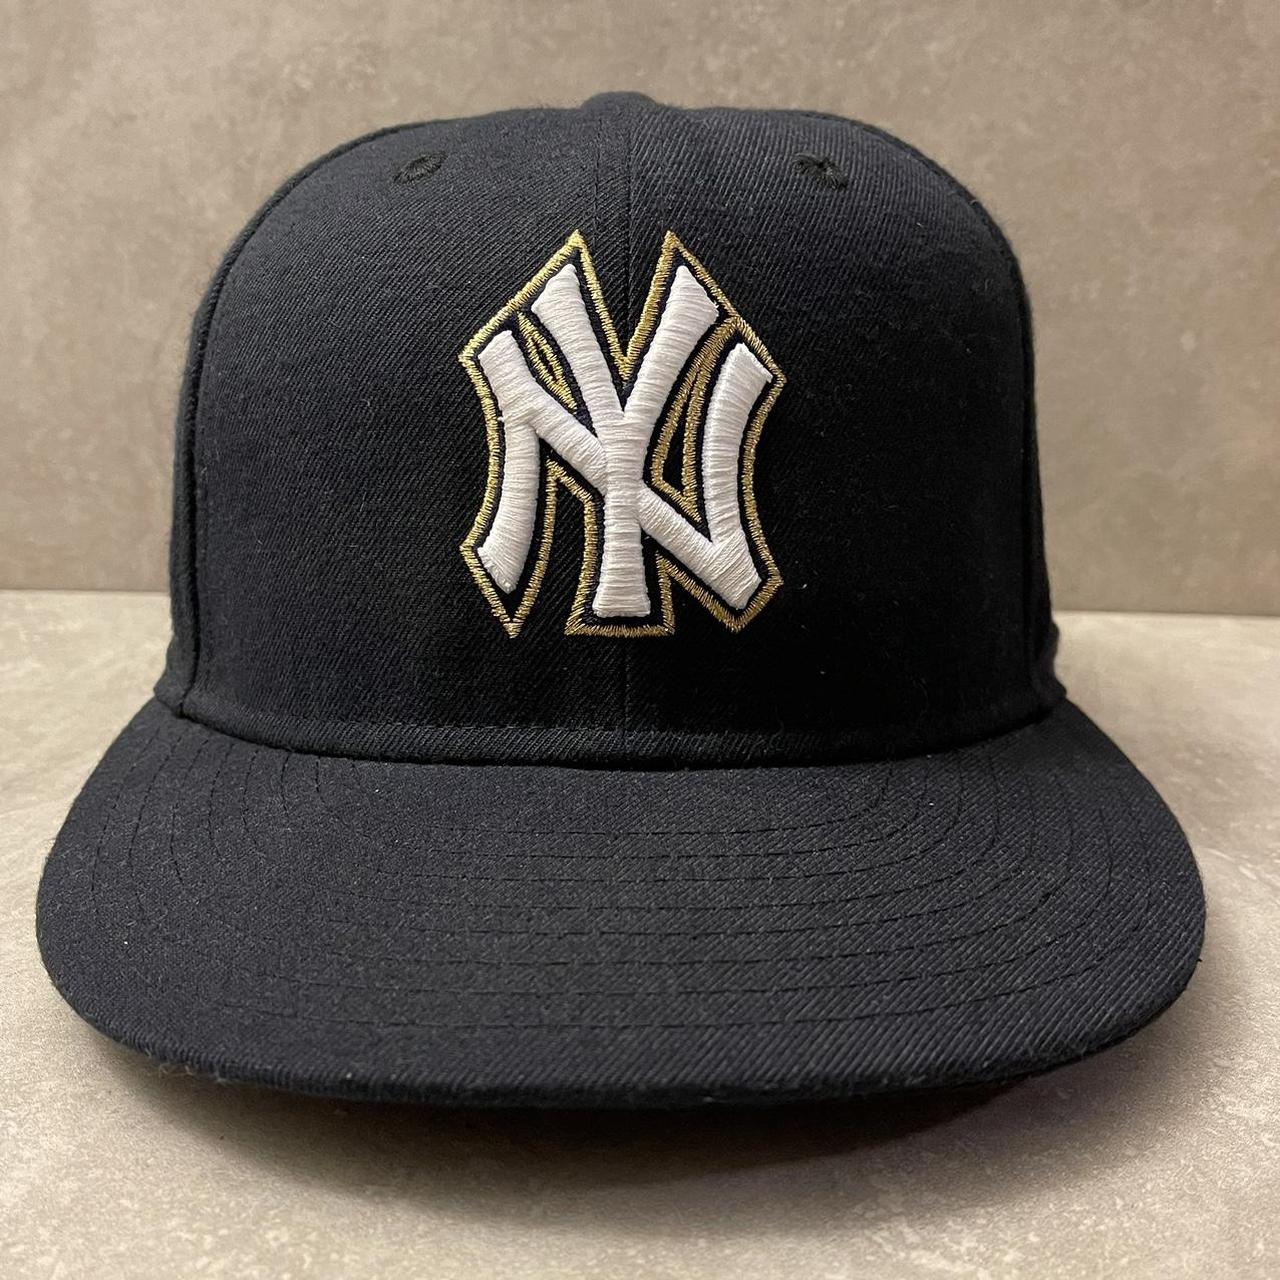 01 New Era 2009 World Series Yankees Fitted Hat SOLD OUT